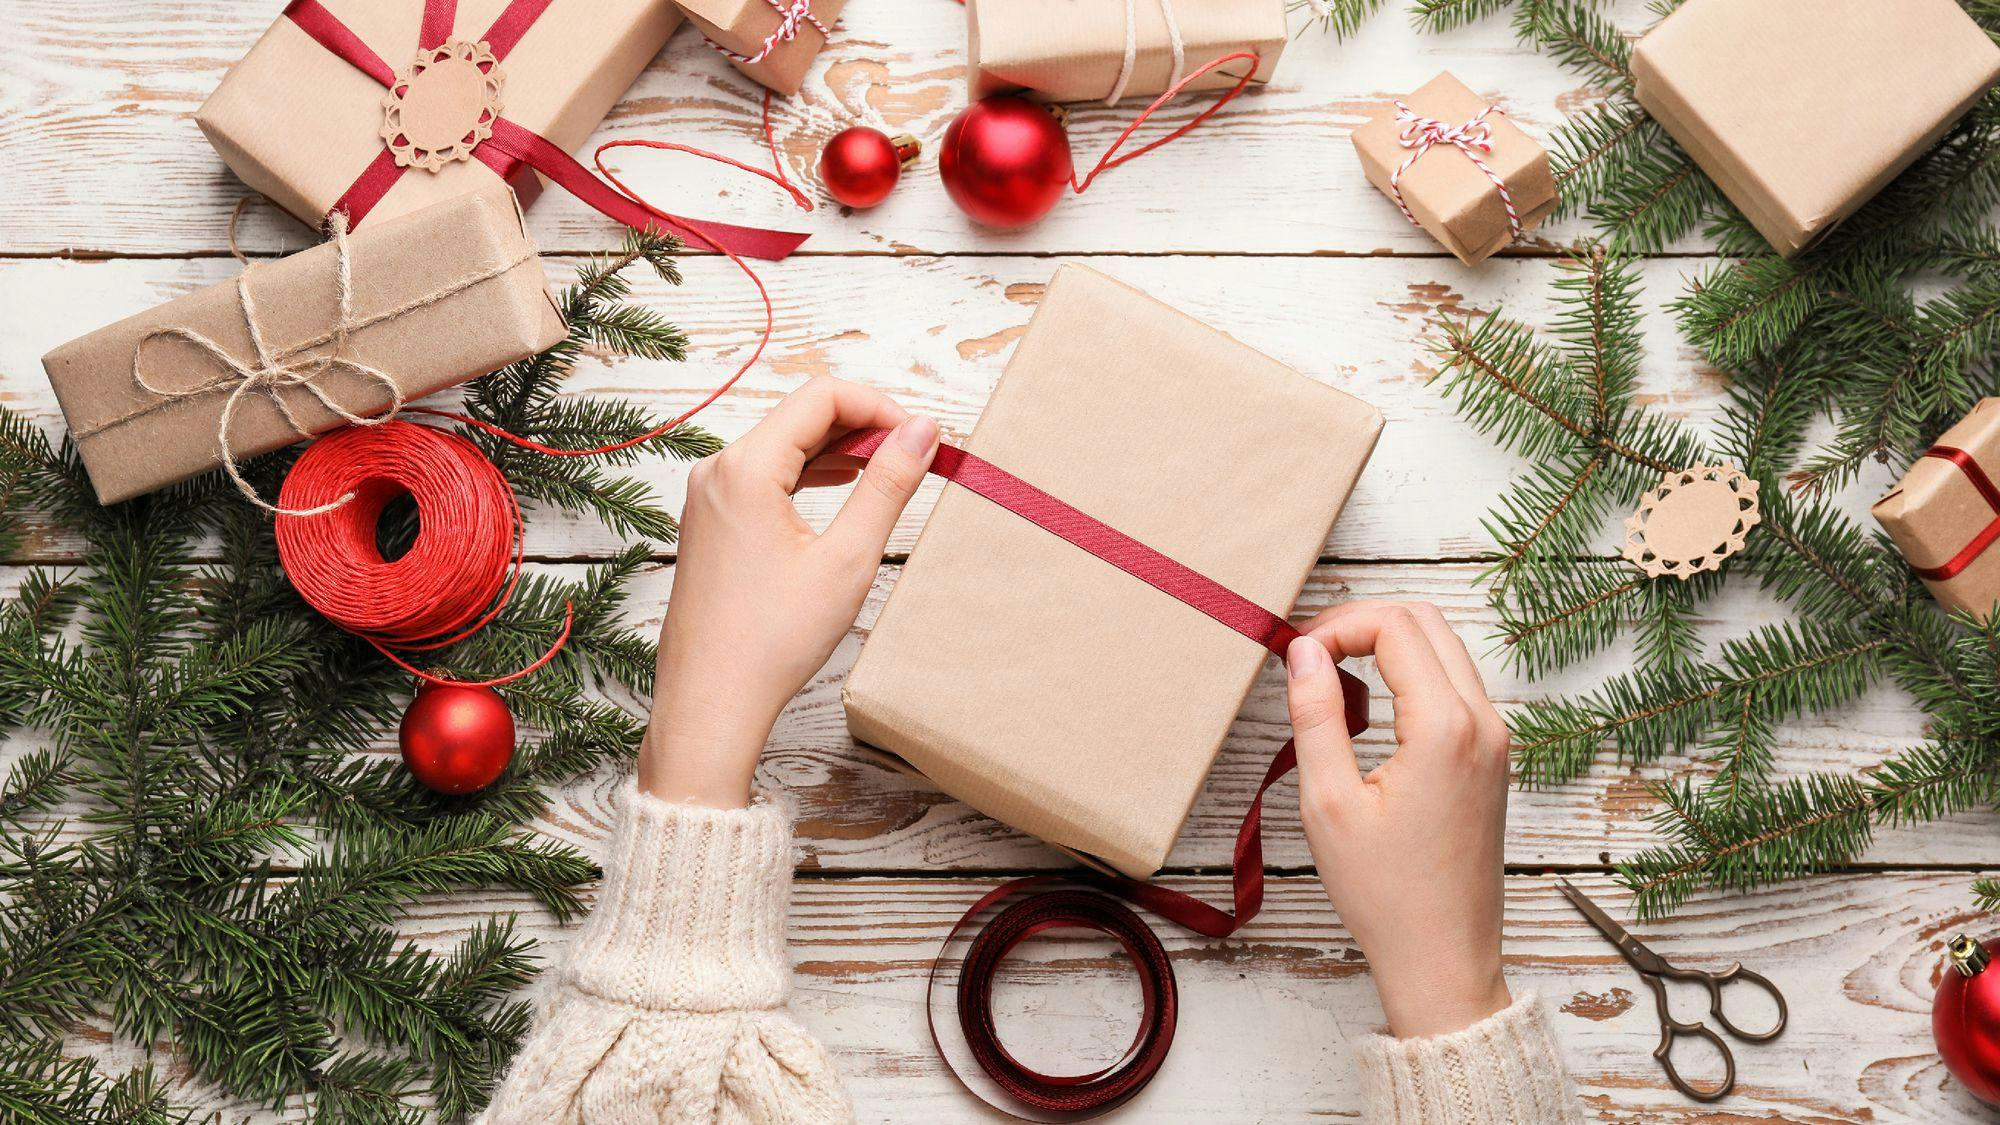 5 Smart Tips to Keep Your Christmas Gifts on a Budget